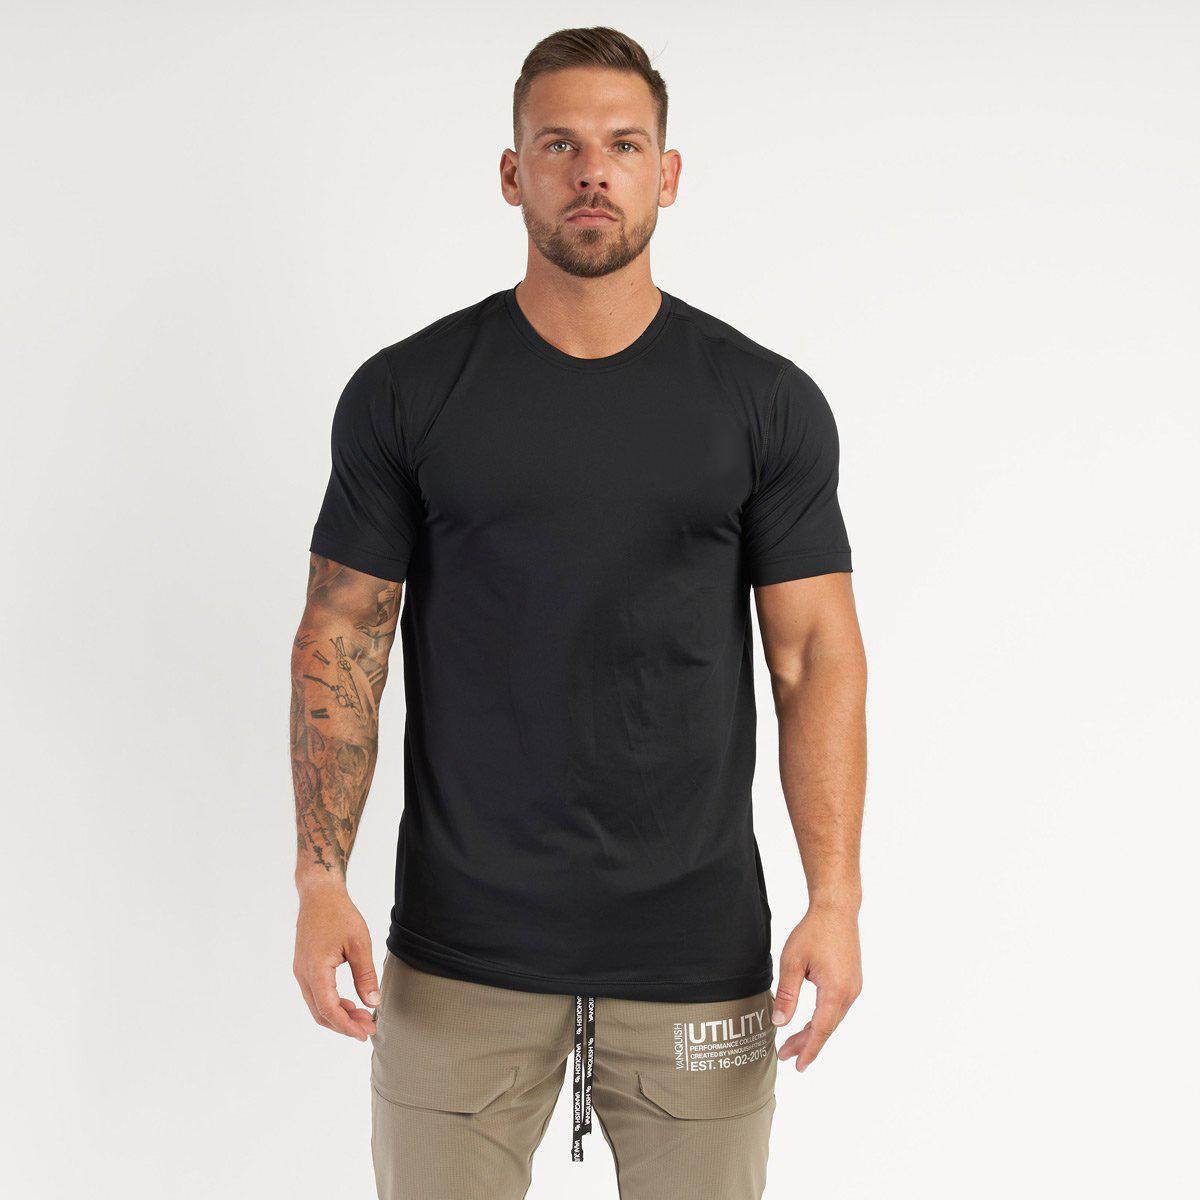 YO-001 Men's Clothing Manufacturers & Suppliers - Fito